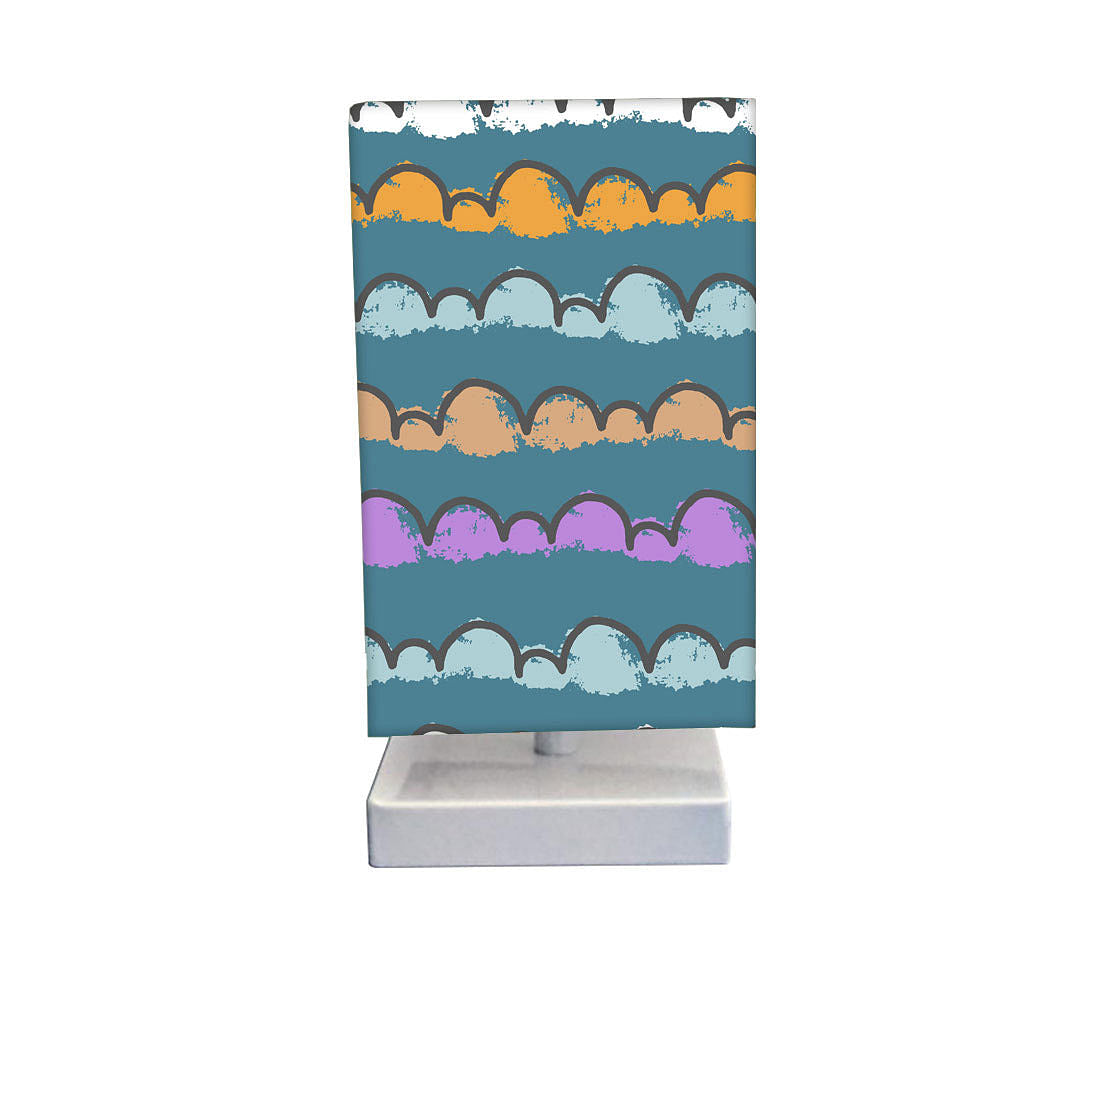 Table Lamp For Bedroom - Clouds of Color Nutcase